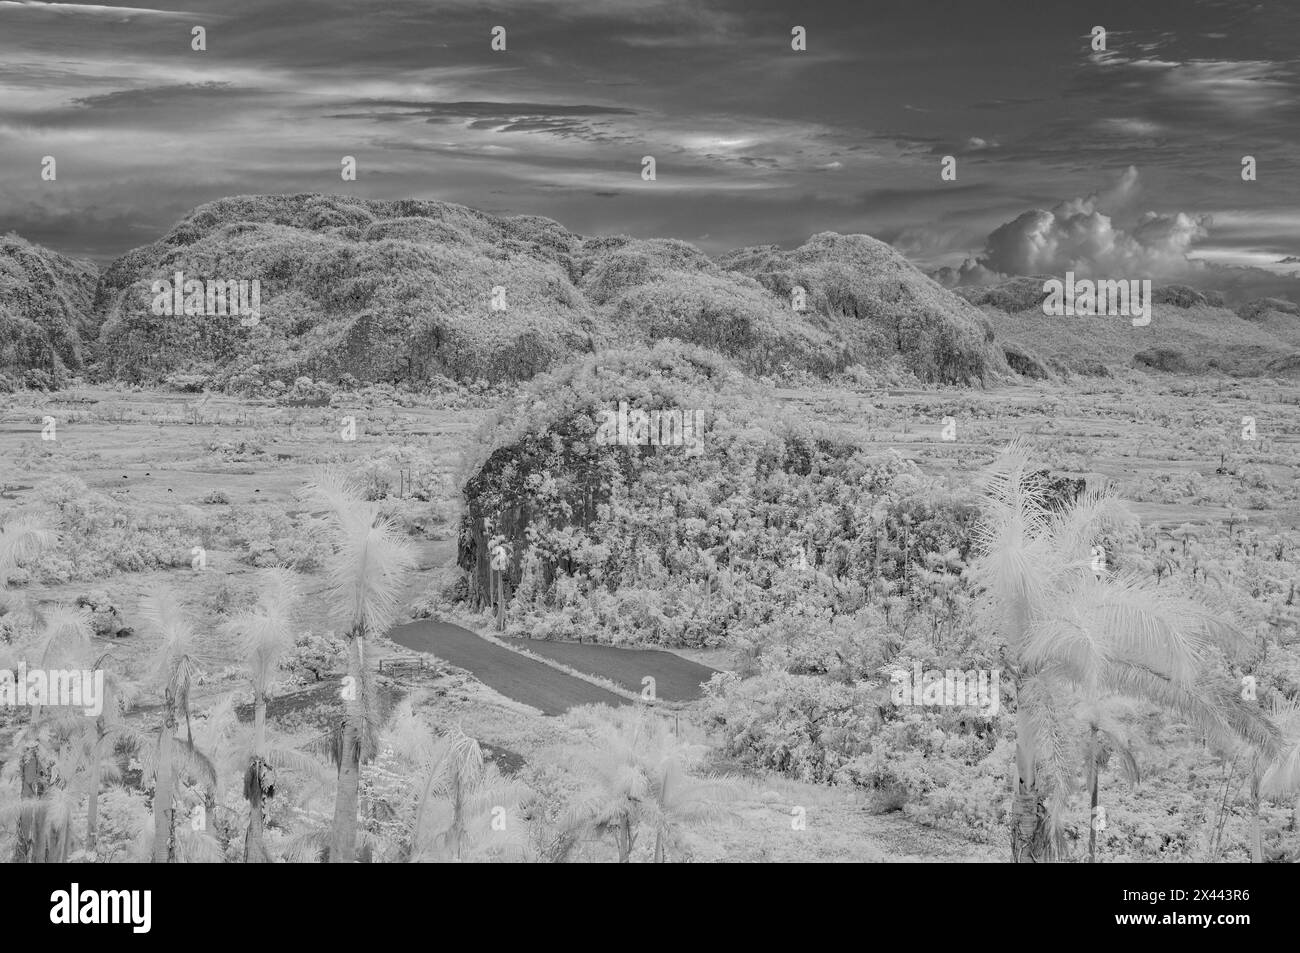 An infrared landscape picture taken looking across the Vinales valley at the dramatic Karst landscape. Near Vinales, Cuba Stock Photo